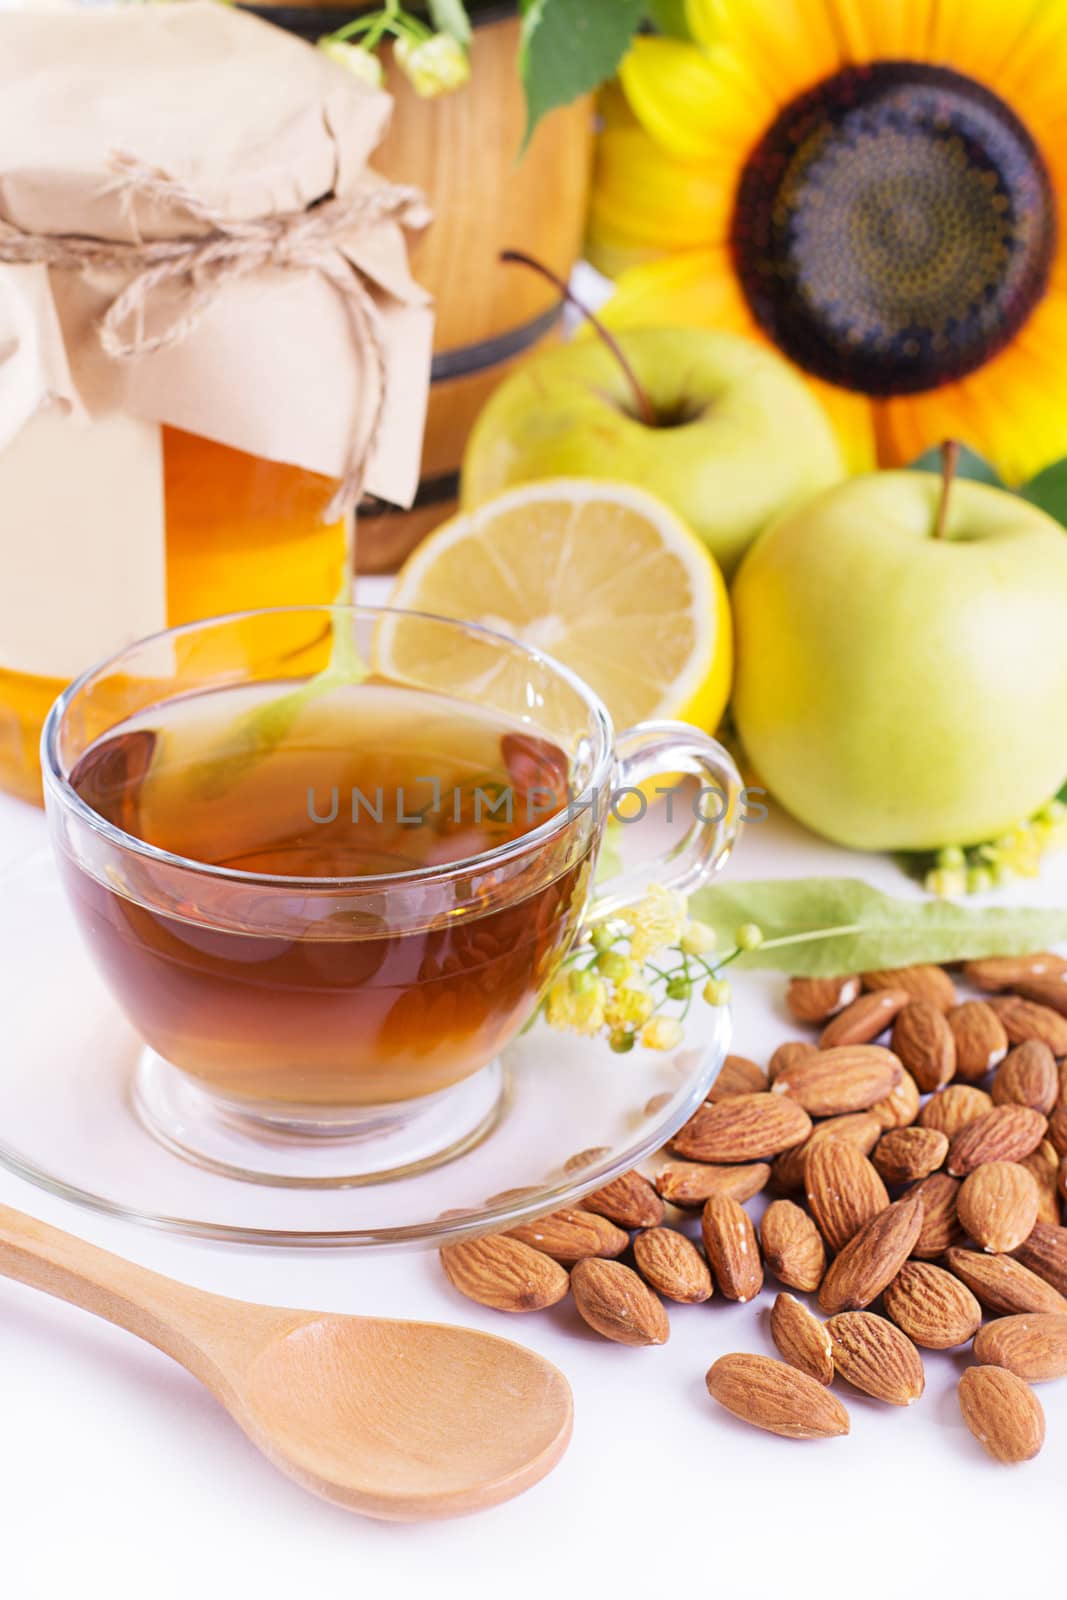 Cup of tea with linden honey, apples, almonds by Angel_a